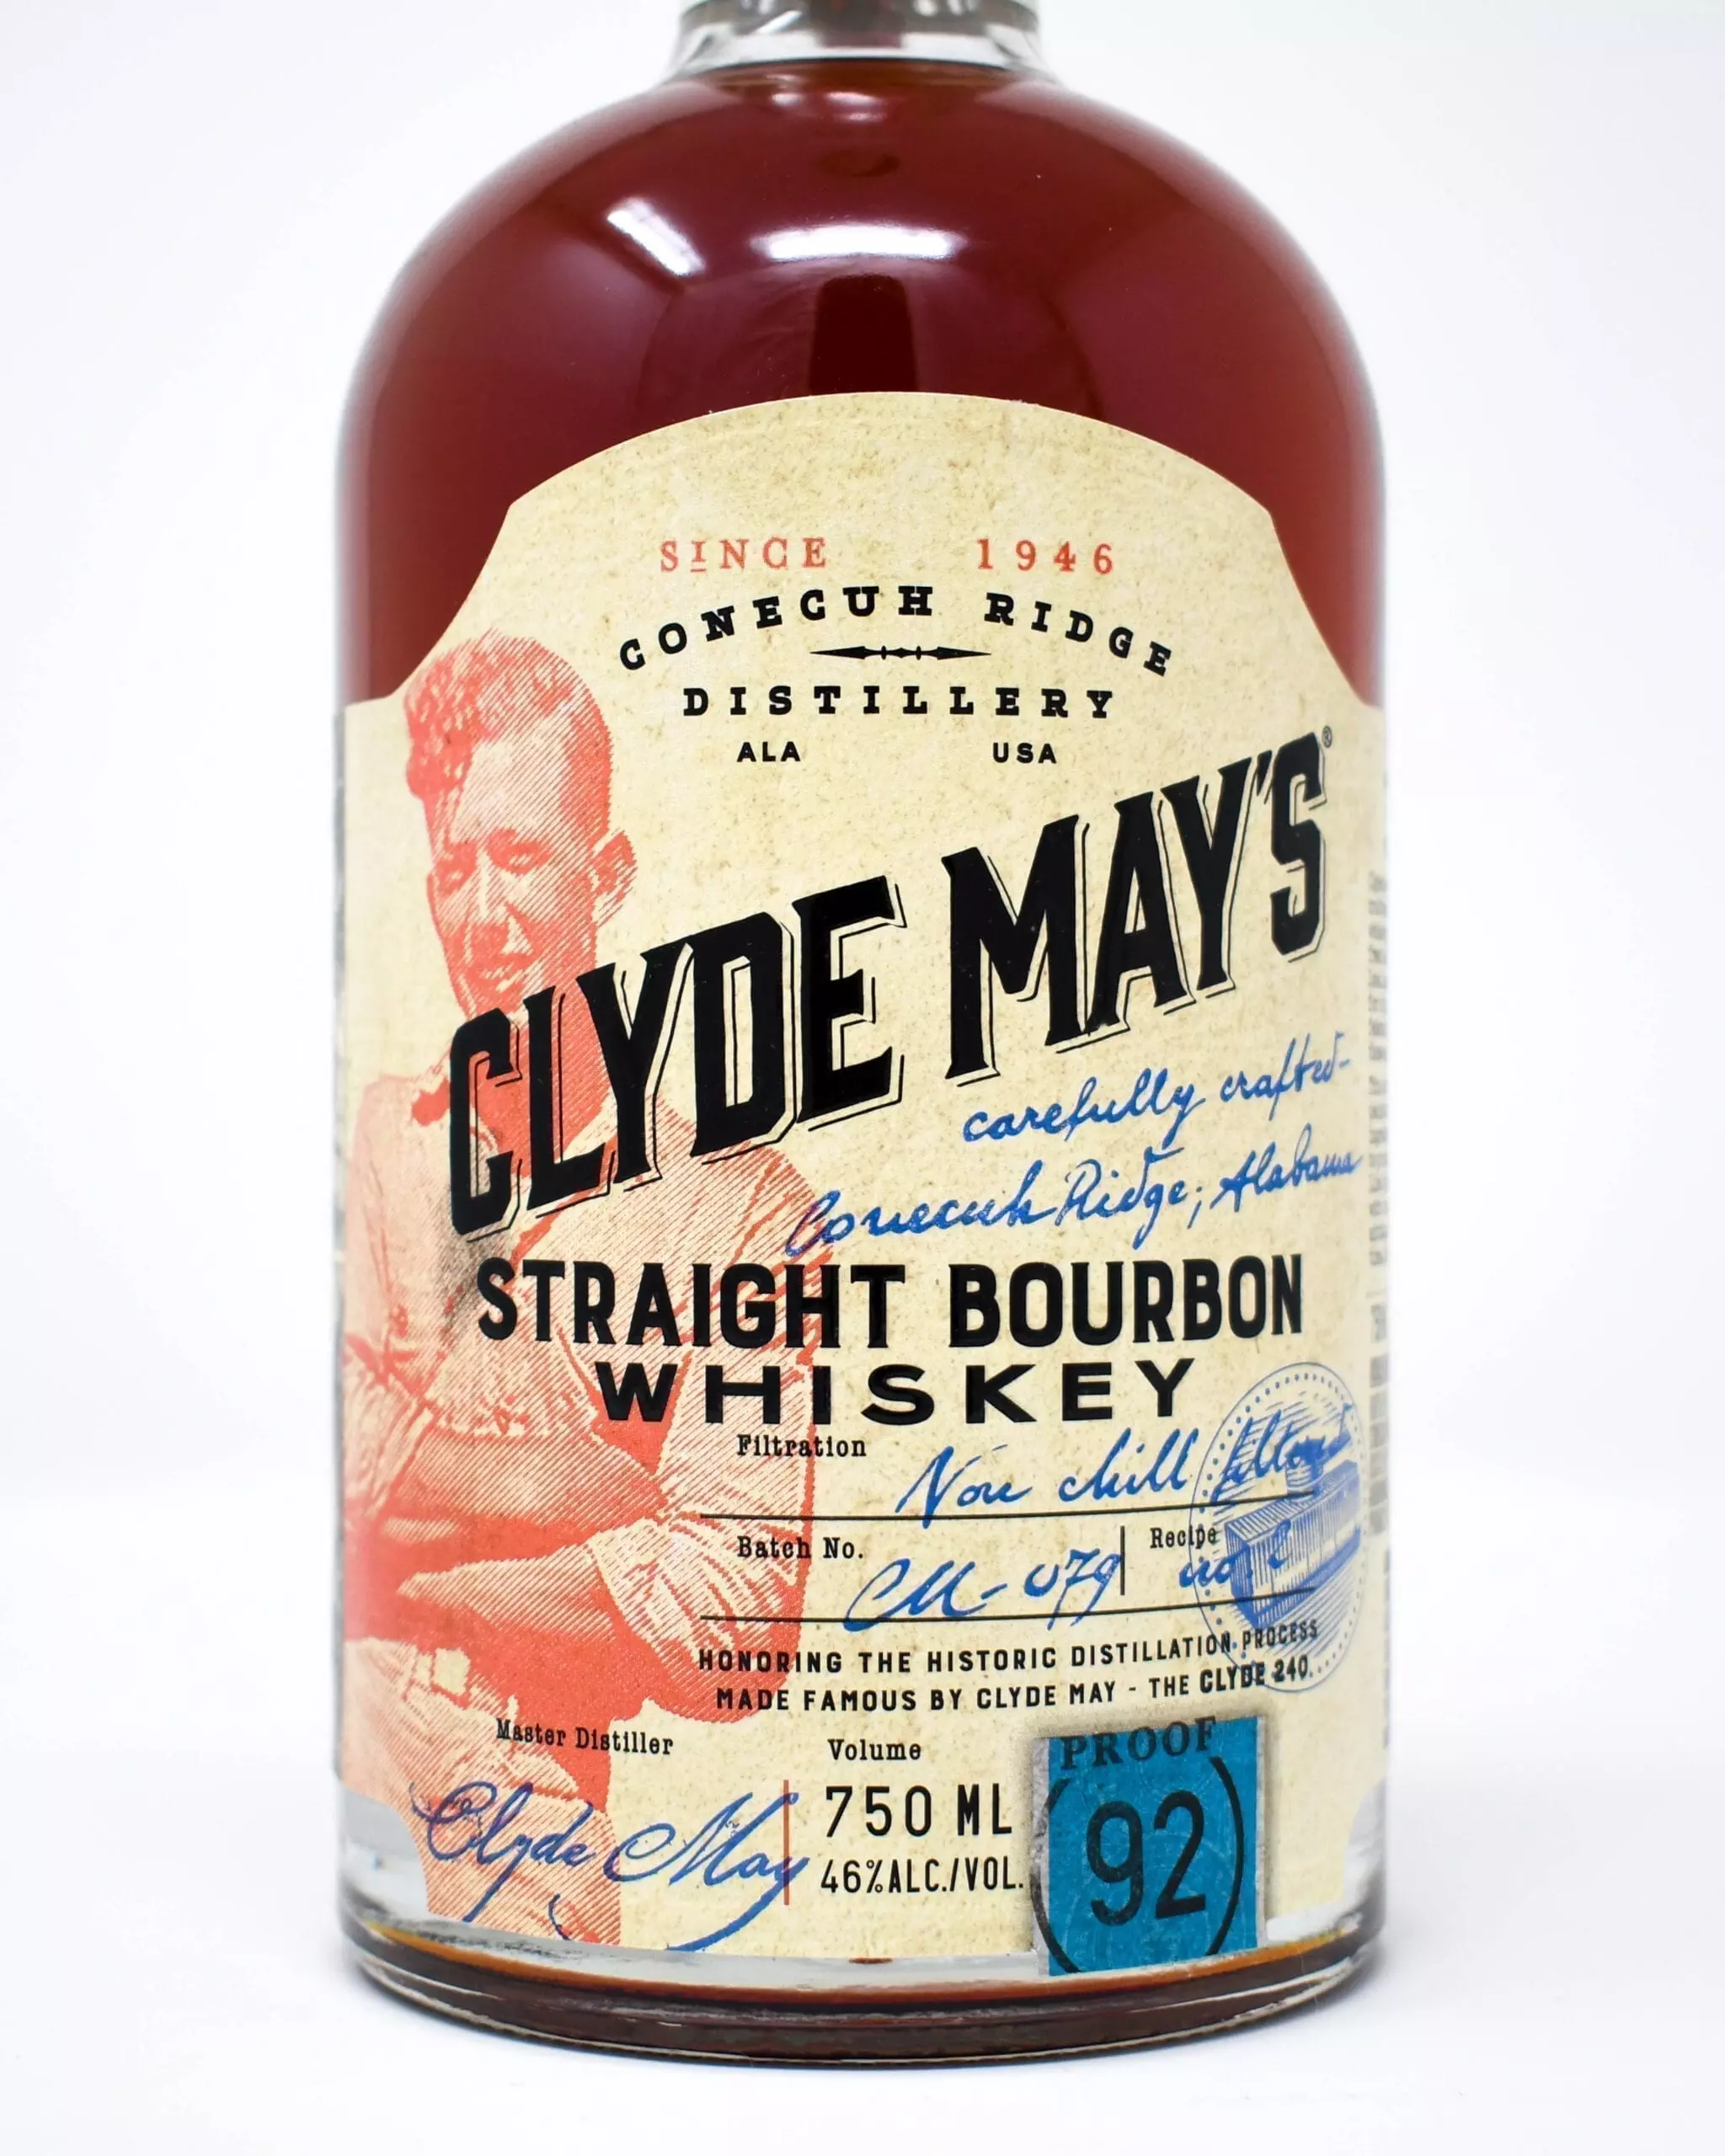 Clyde May's Bourbon